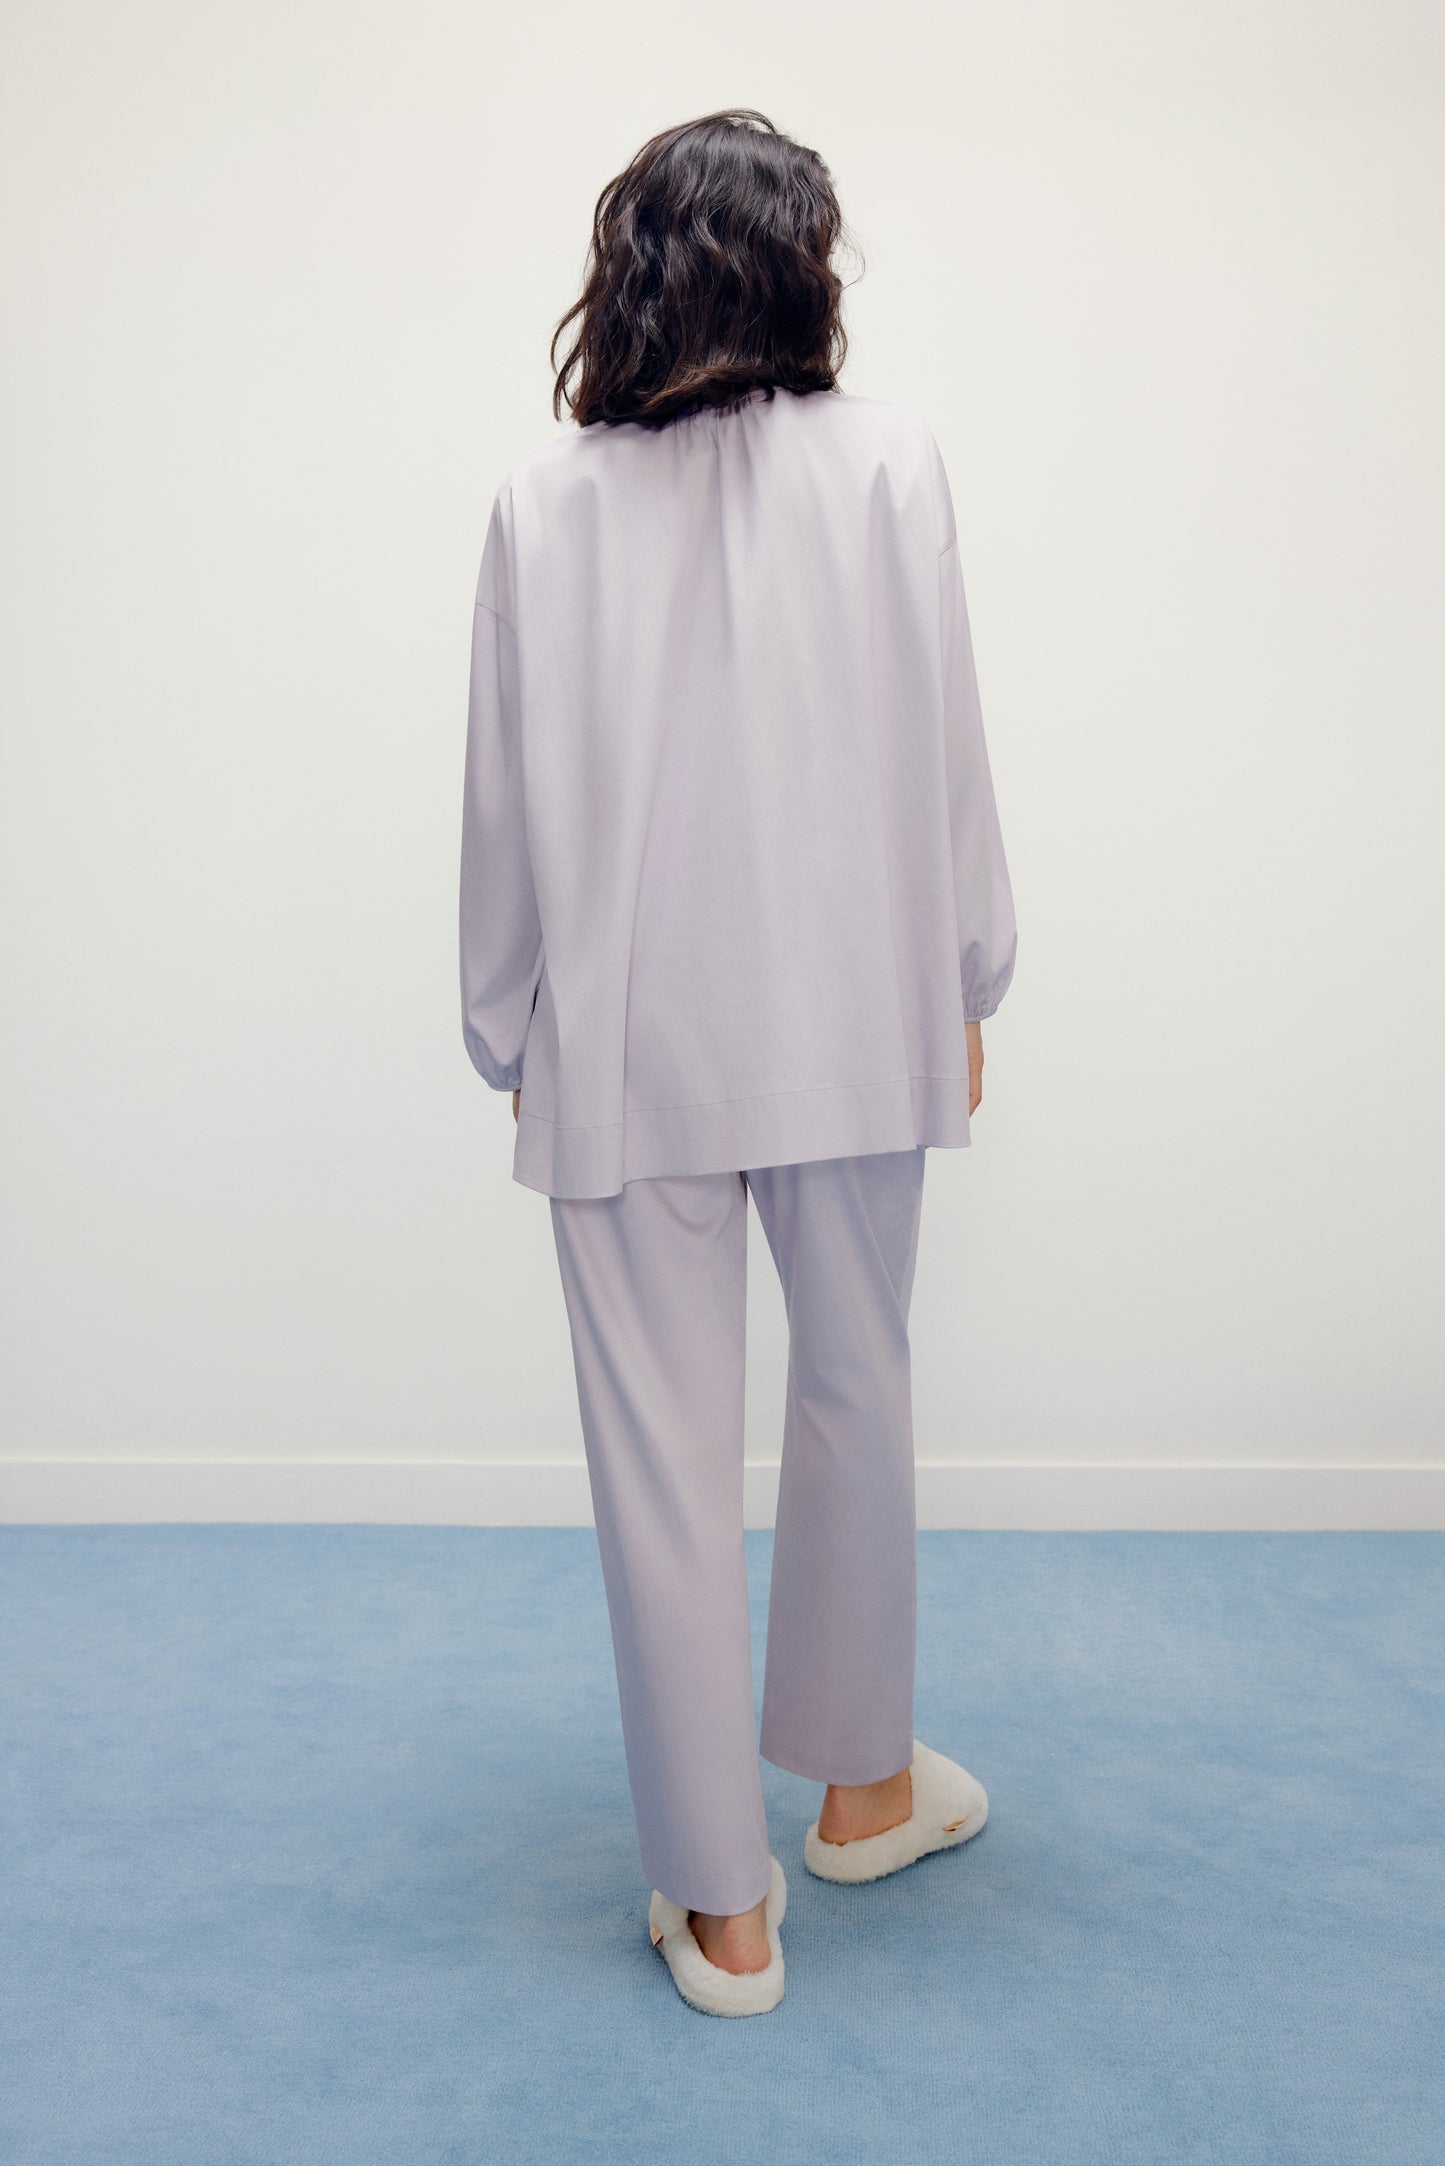 back of a woman wearing a purple pajama sets and white slippers